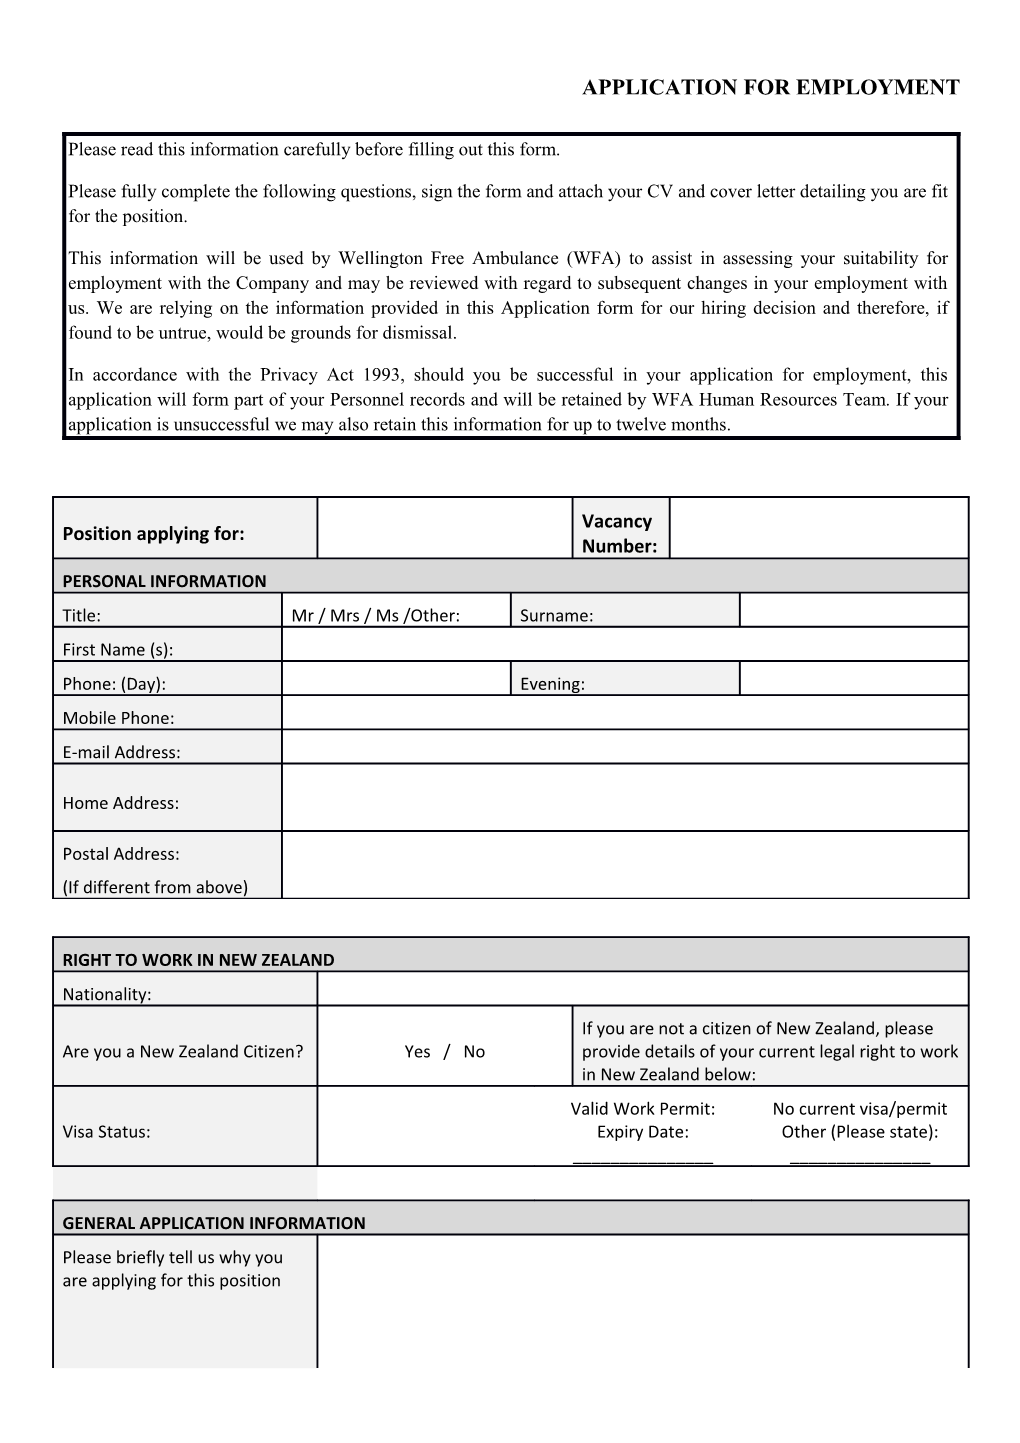 Application for Employment s54